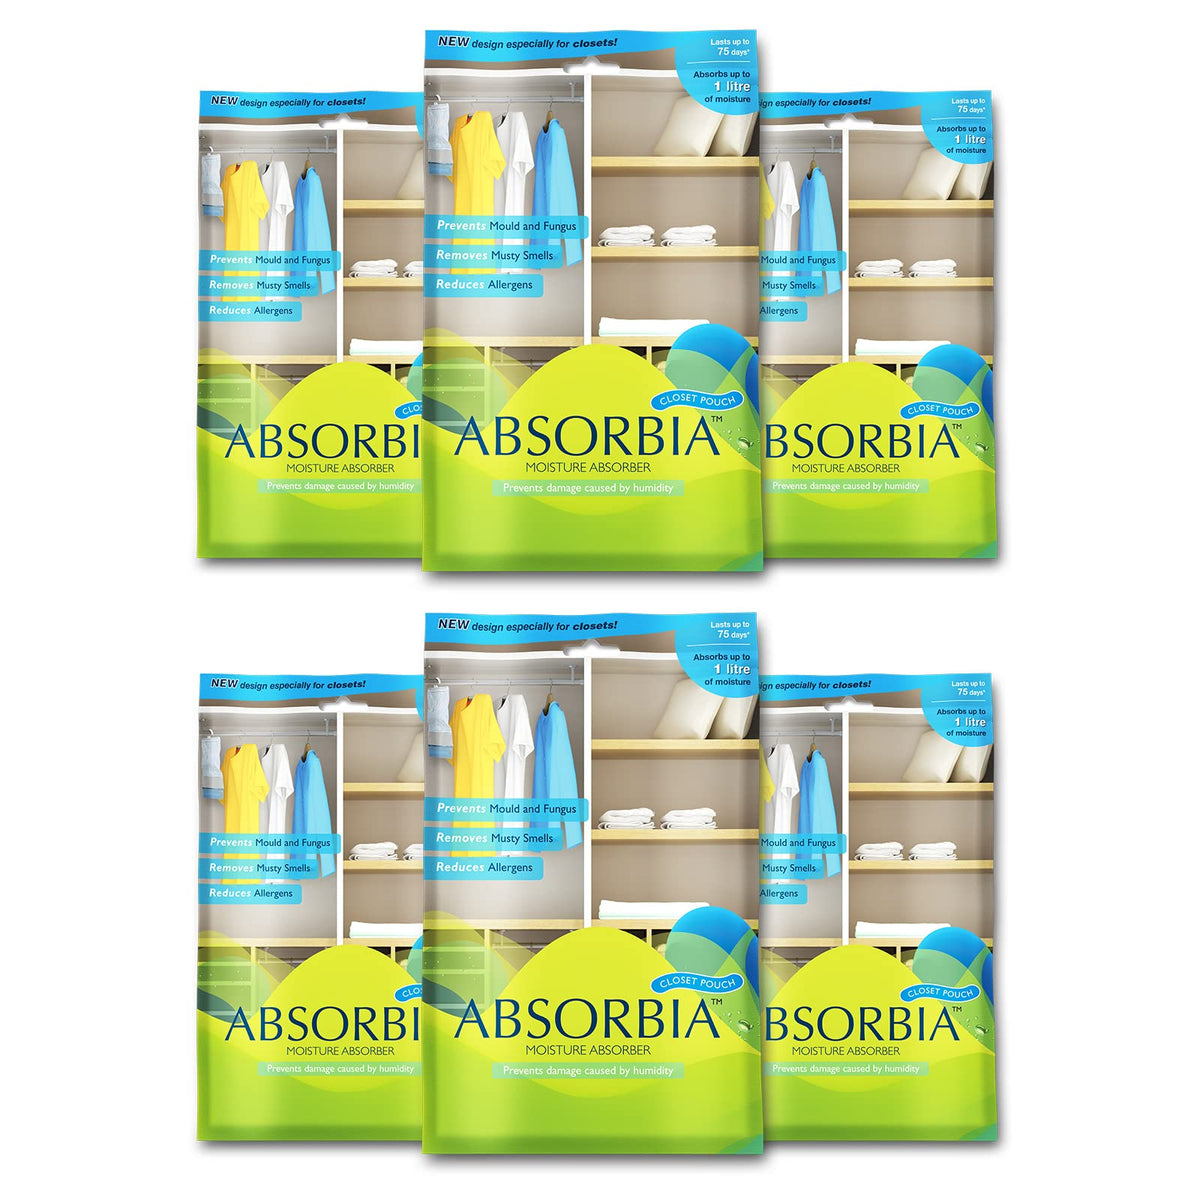 Absorbia Moisture Absorber| Absorbia Hanging Pouch - Season Pack of 6 (440 gms X 6 Pouches) | Absorption Capacity 1000ml Each | Dehumidifier for Wardrobe, Closet & Bathroom| Fights Against Moisture, Mould, Fungus & Musty Smells